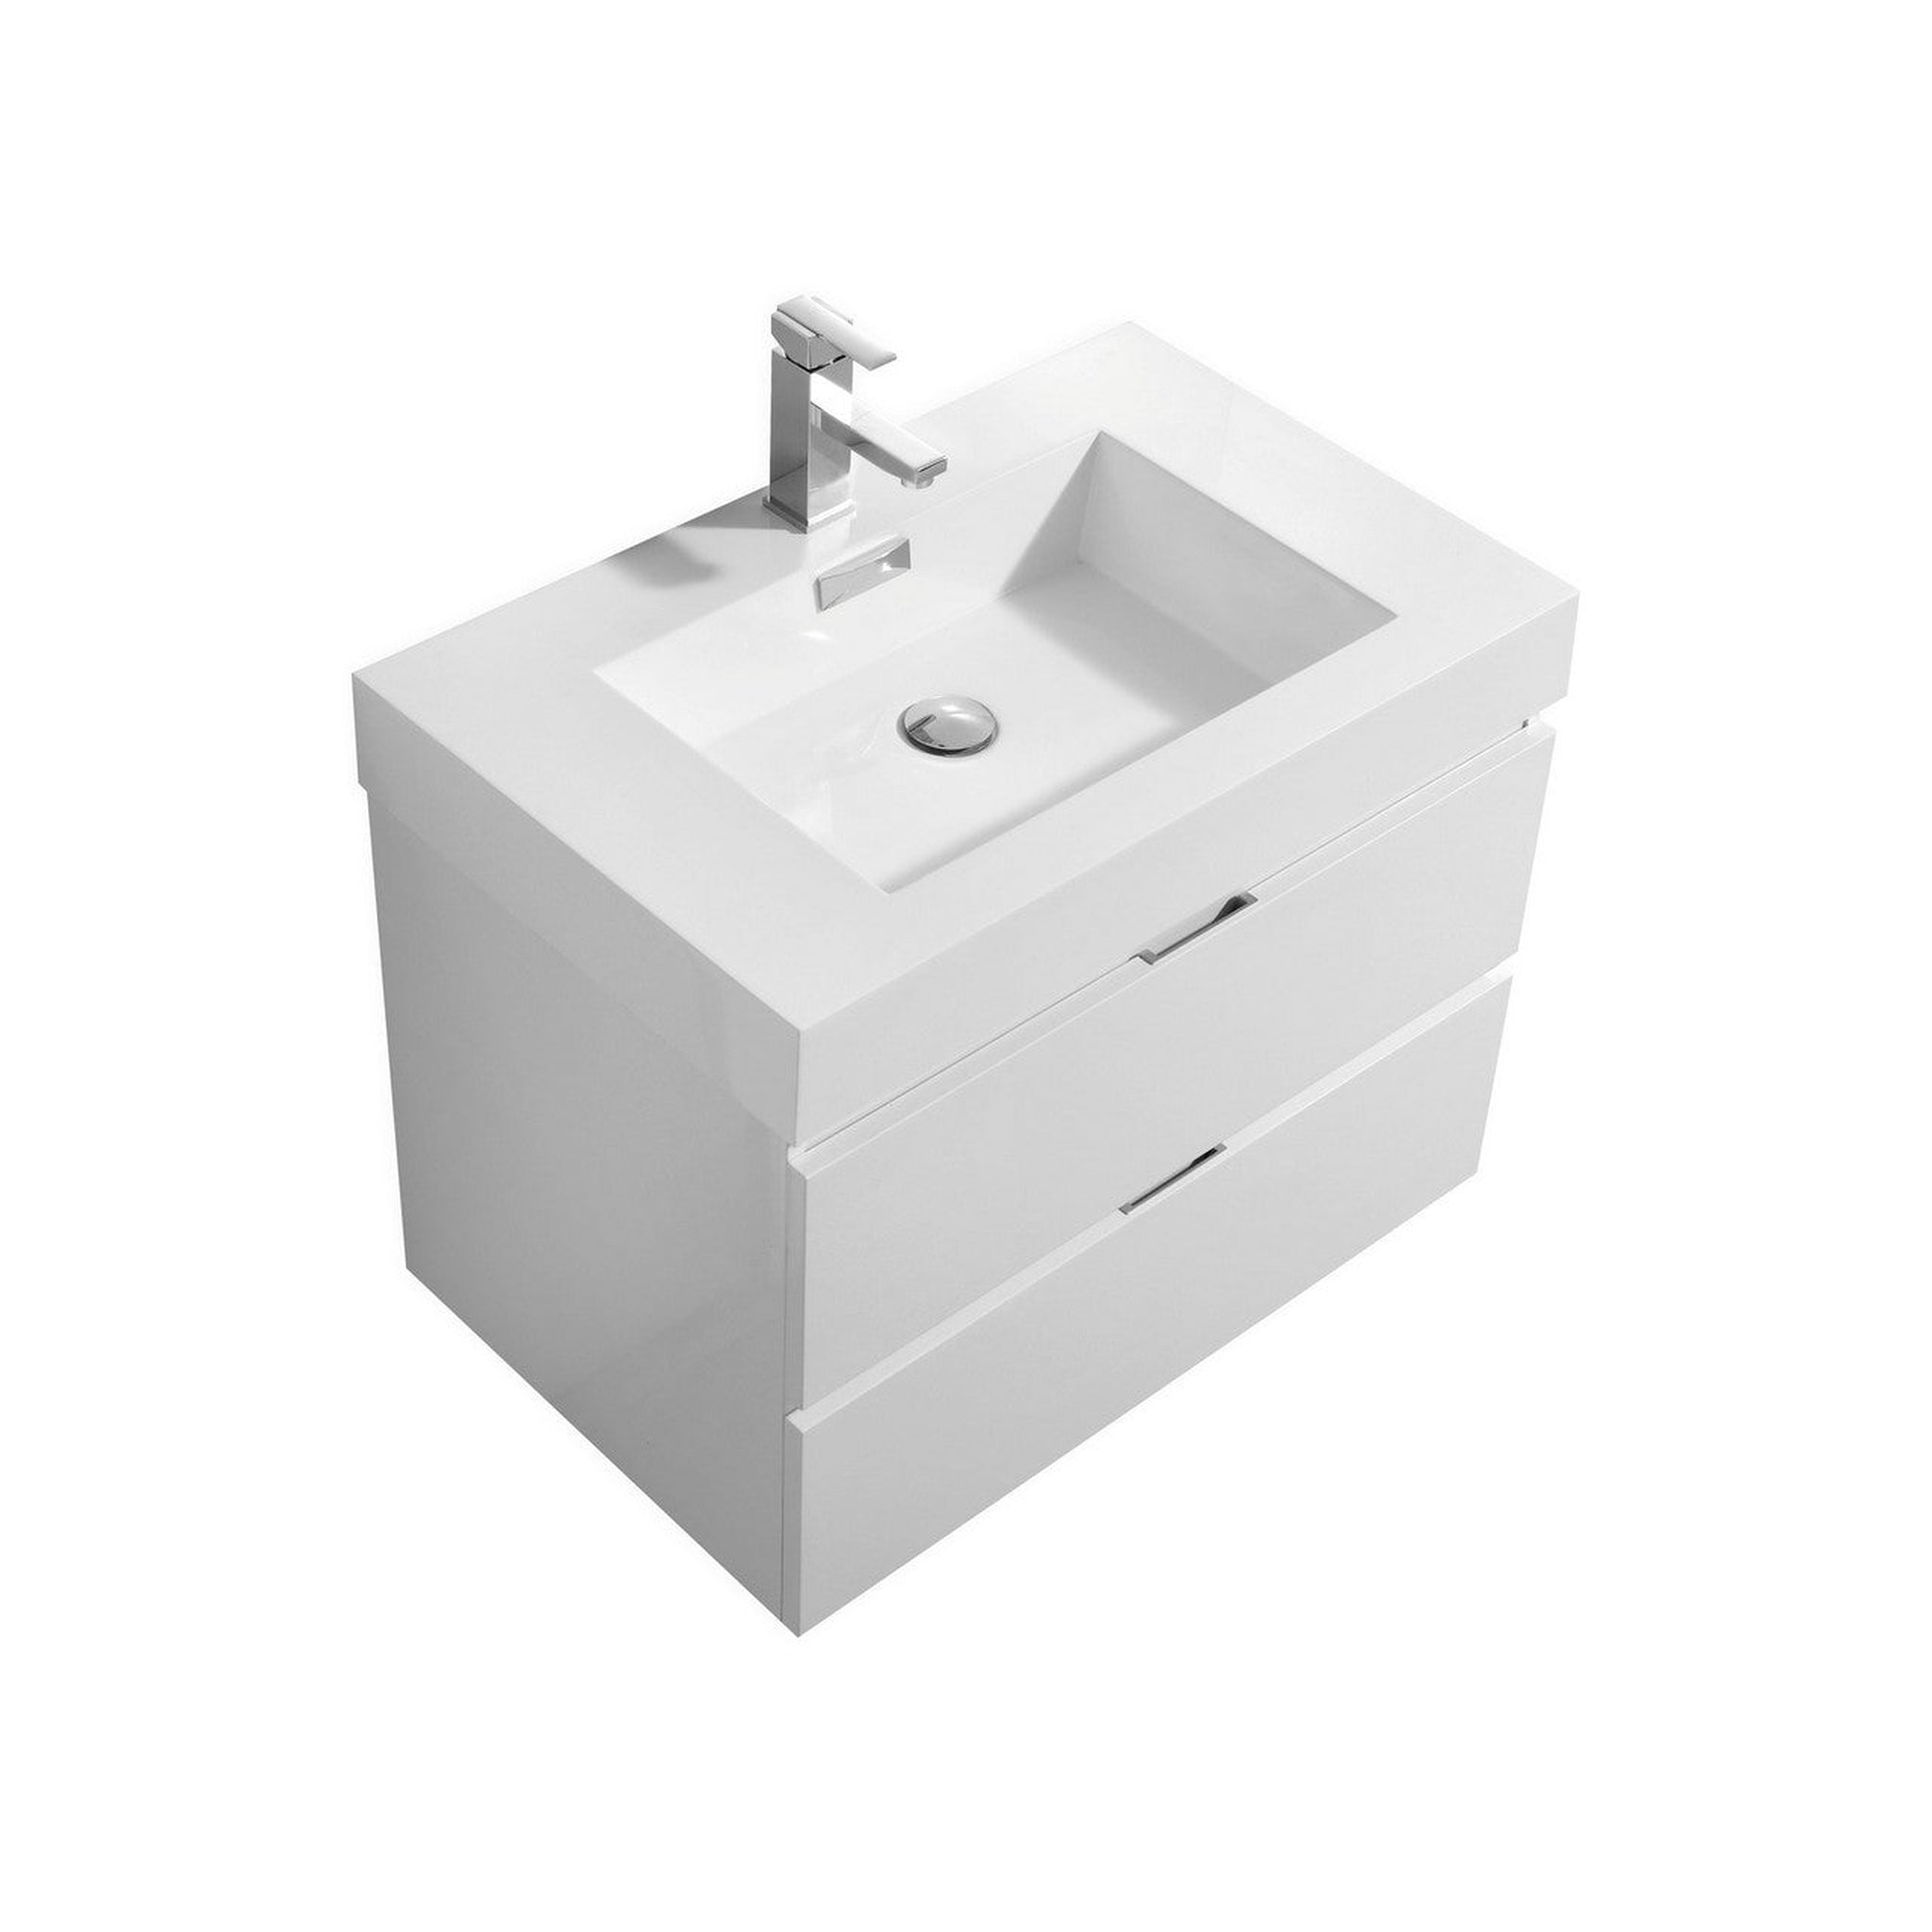 KubeBath, KubeBath Bliss 30" High Gloss White Wall-Mounted Modern Bathroom Vanity With Single Integrated Acrylic Sink With Overflow and 30" White Framed Mirror With Shelf